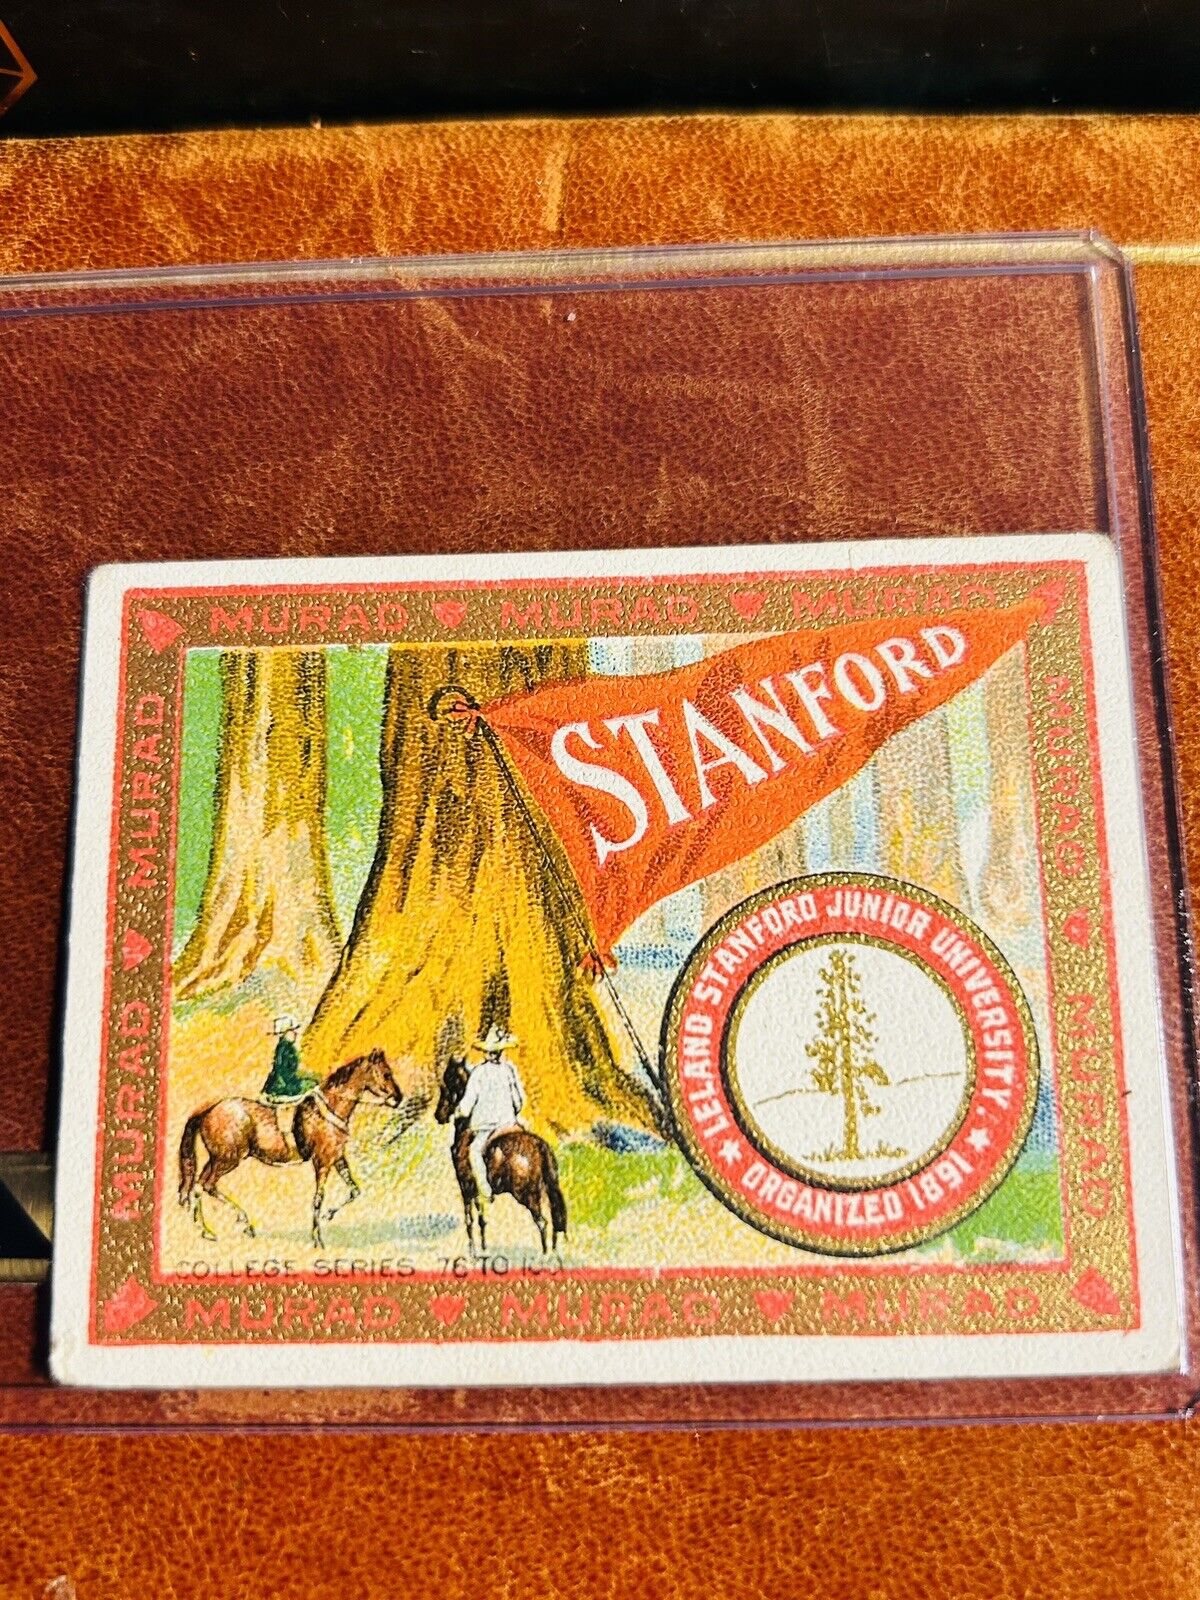 1910s T51 Murad Cigarettes College LELAND STANFORD - New To Market